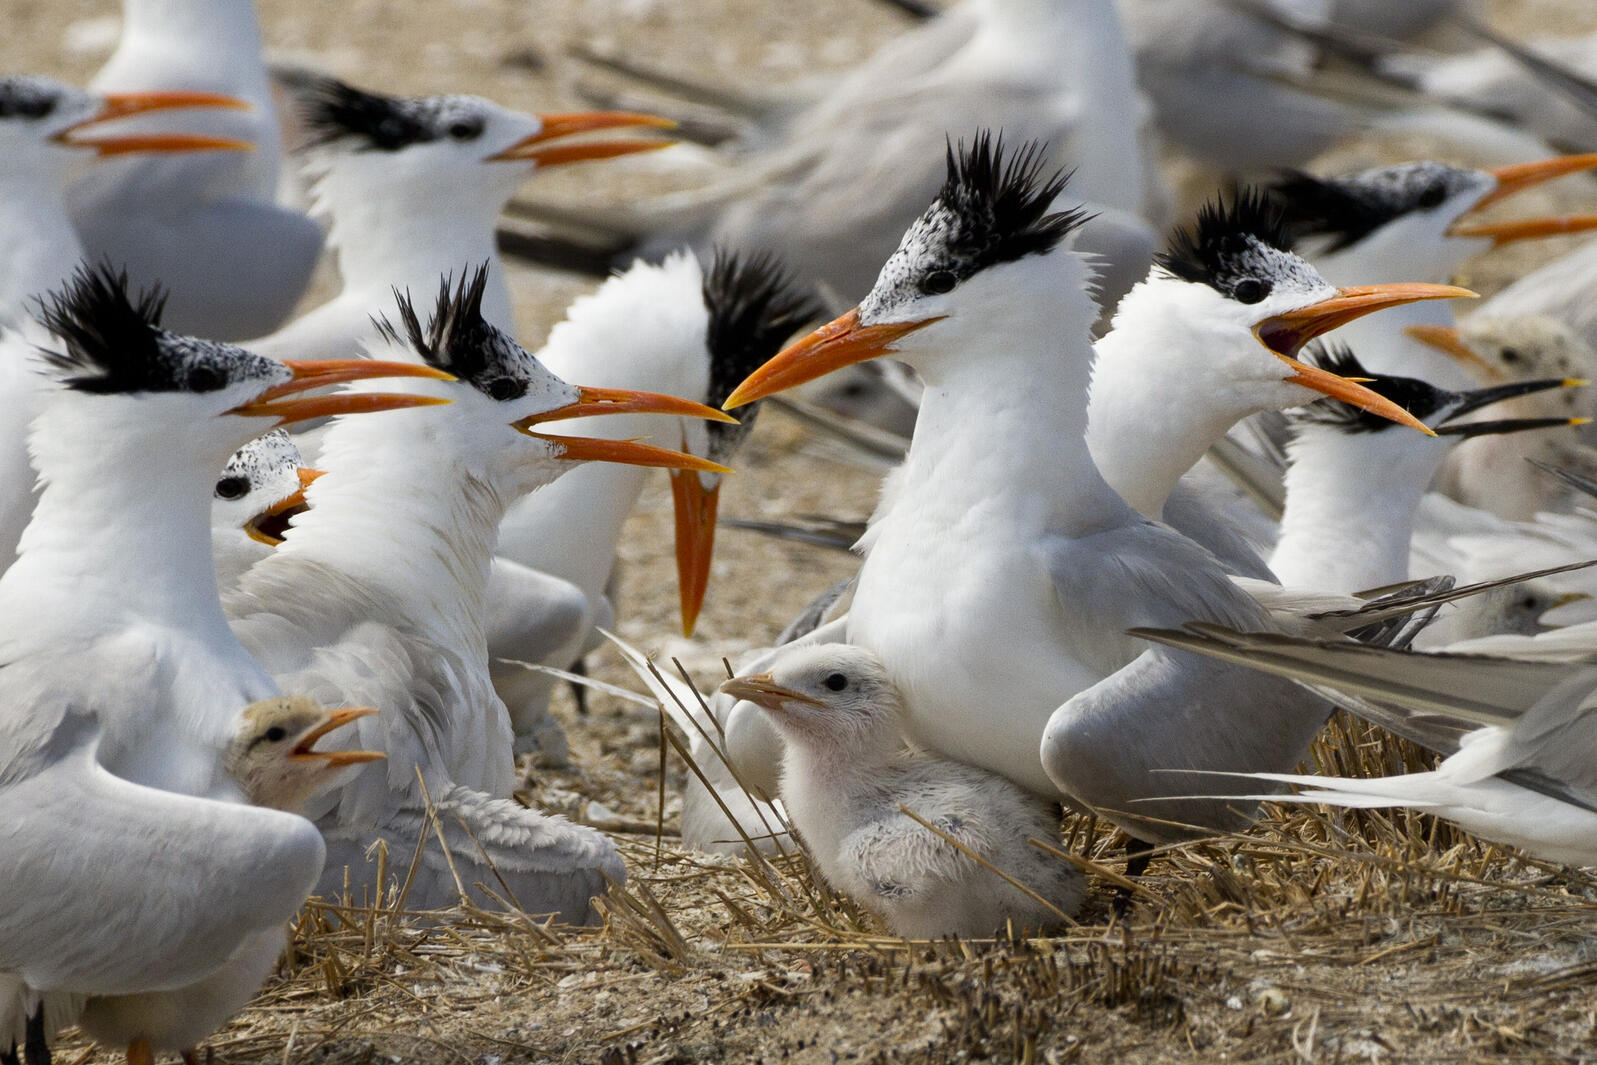 A tern with its chick at a nesting colony.